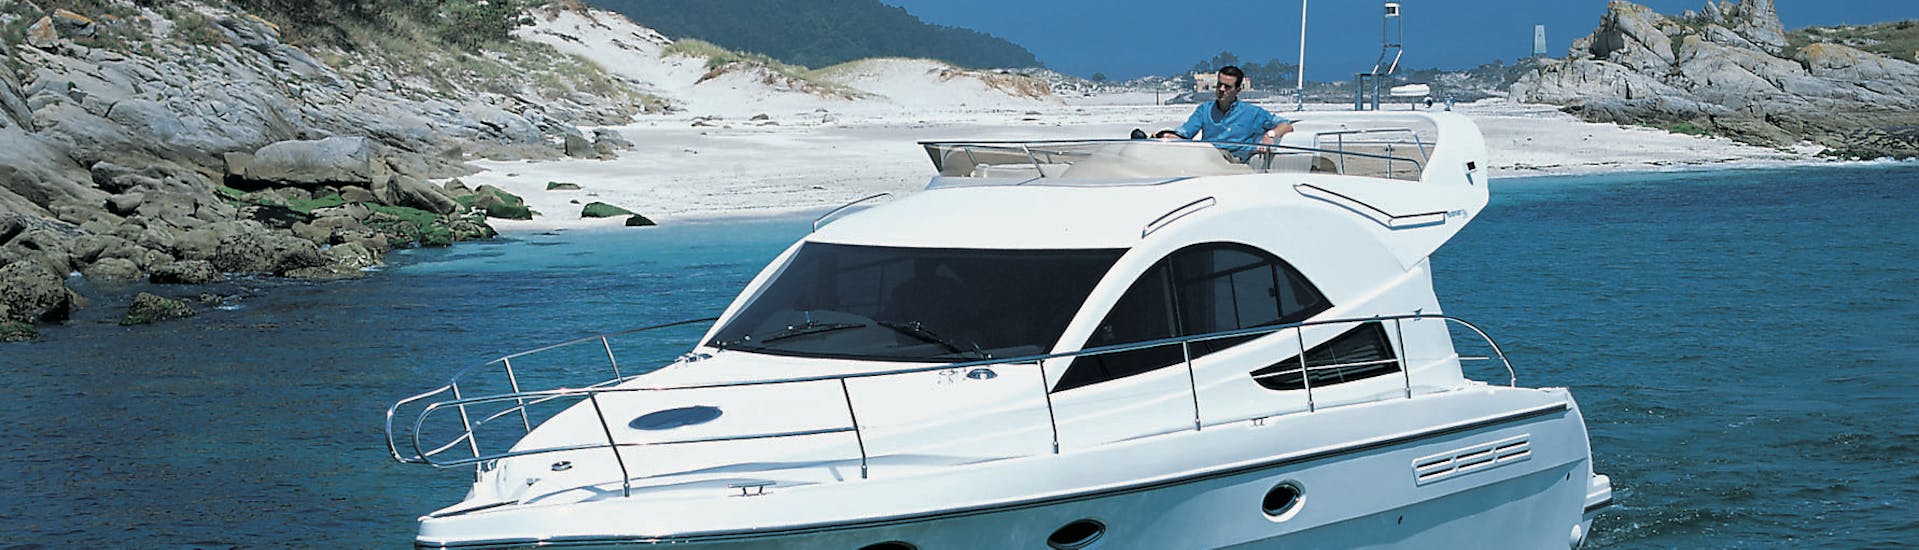 Yacht Rental in Latchi to the Blue Lagoon (up to 20 people).